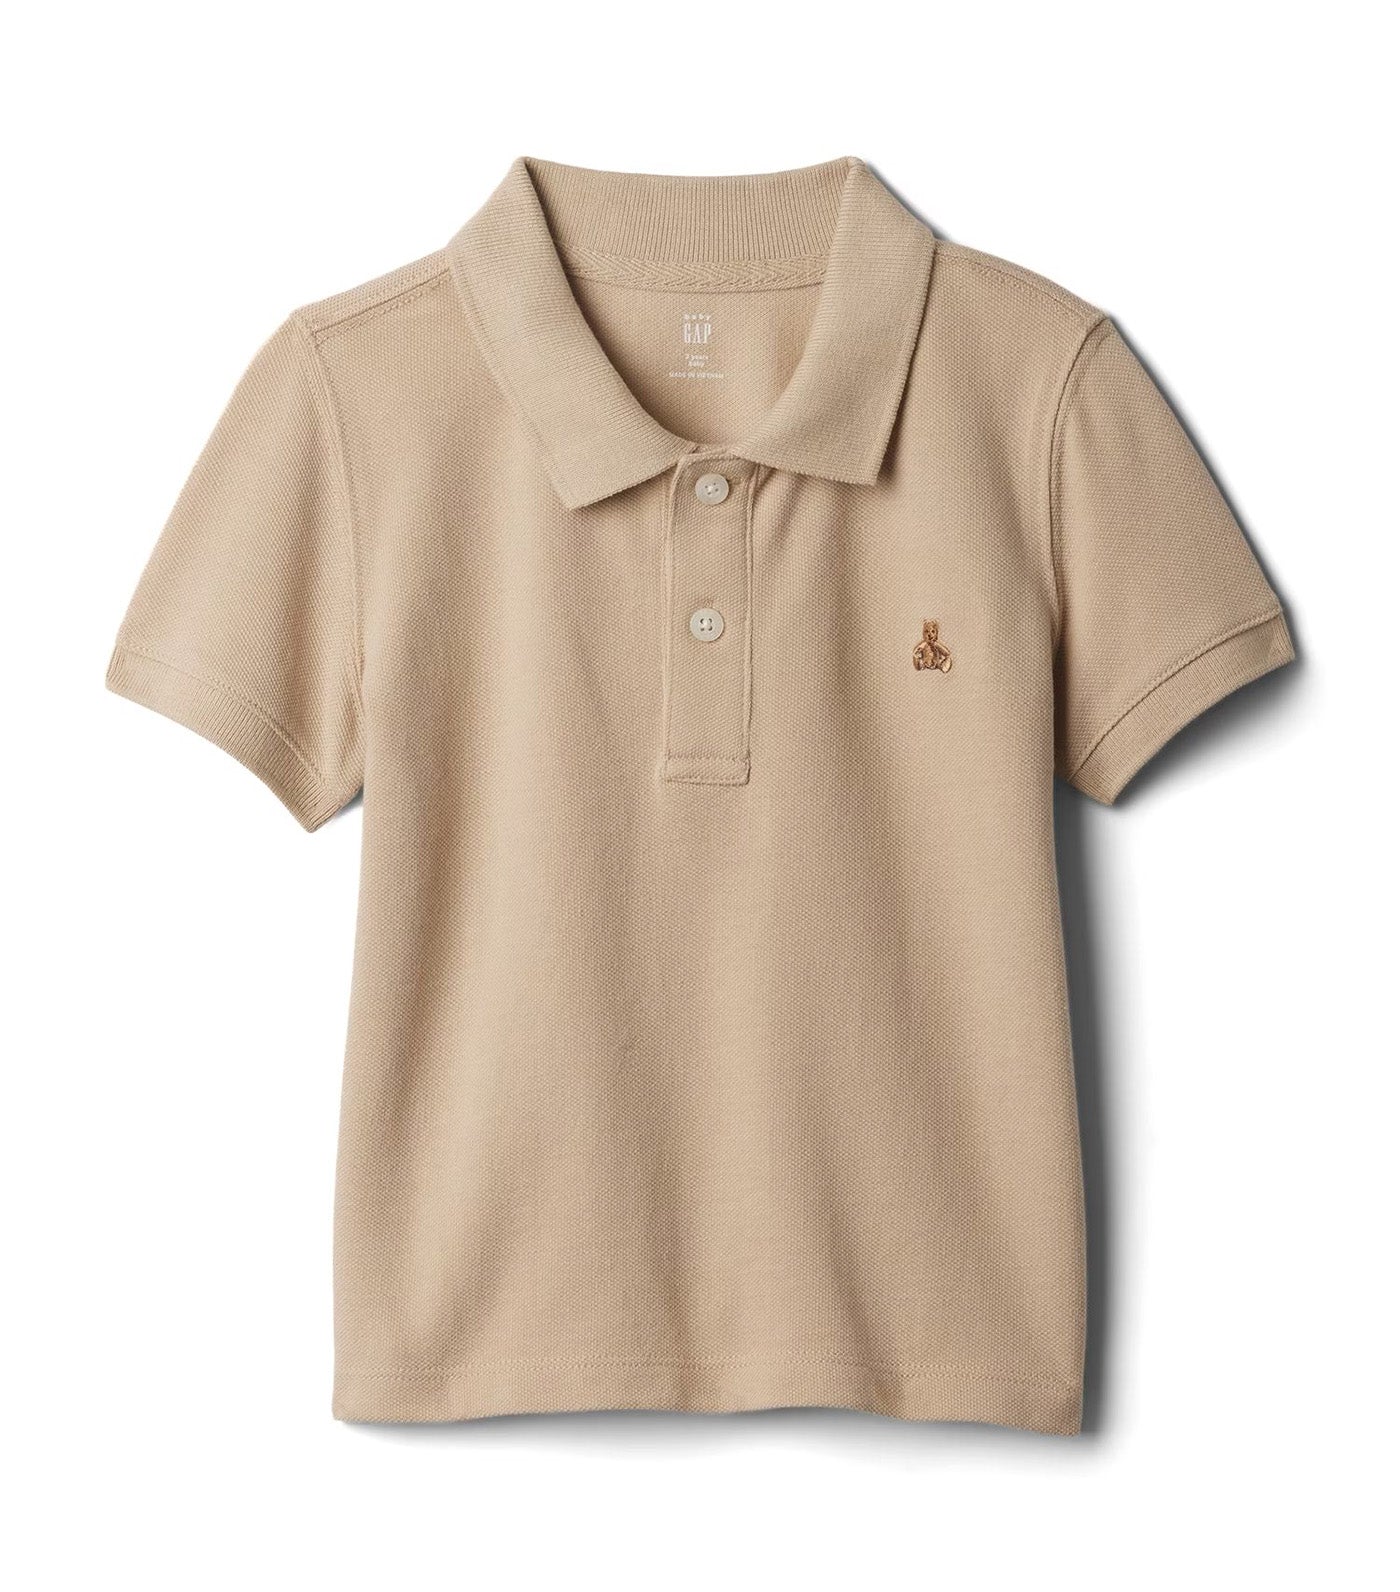 Toddler Polo T-Shirt Wicker 1